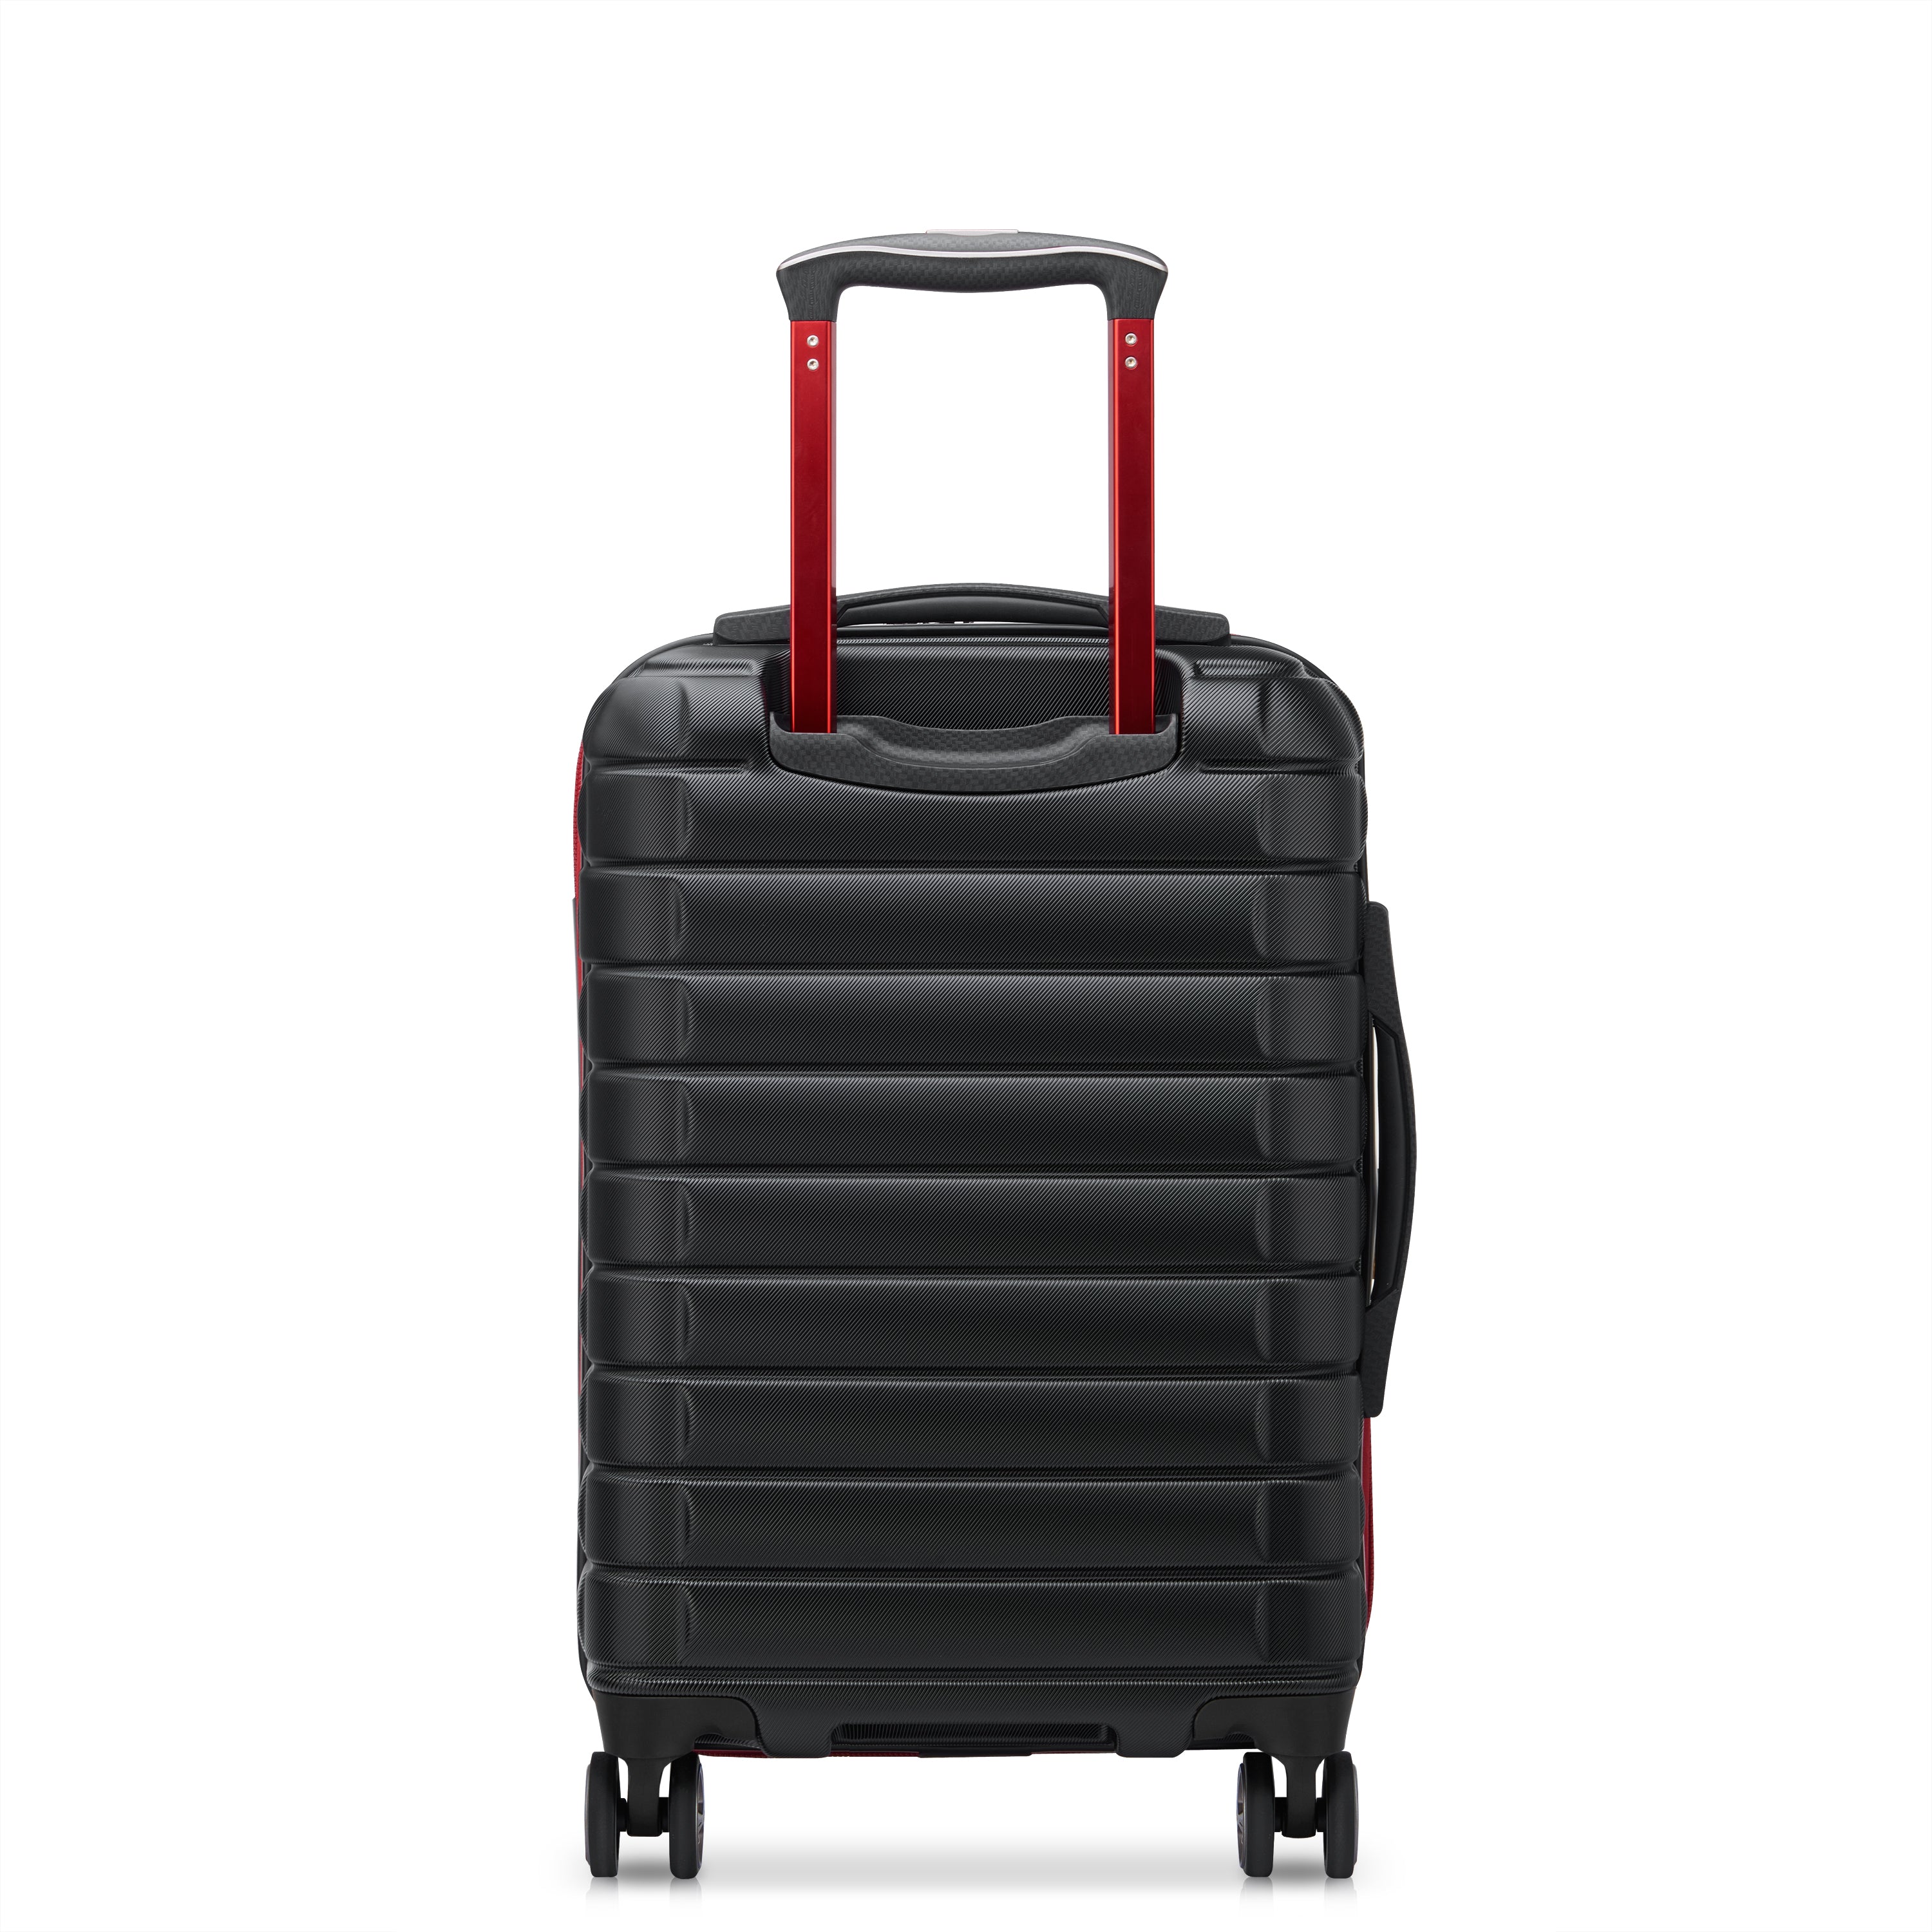 Delsey Shadow 5.0 Alfa Romeo F1 Collection 55cm Hardcase Expandable 4 Double Wheel Cabin Luggage Trolley Case Black - 00287880100F1